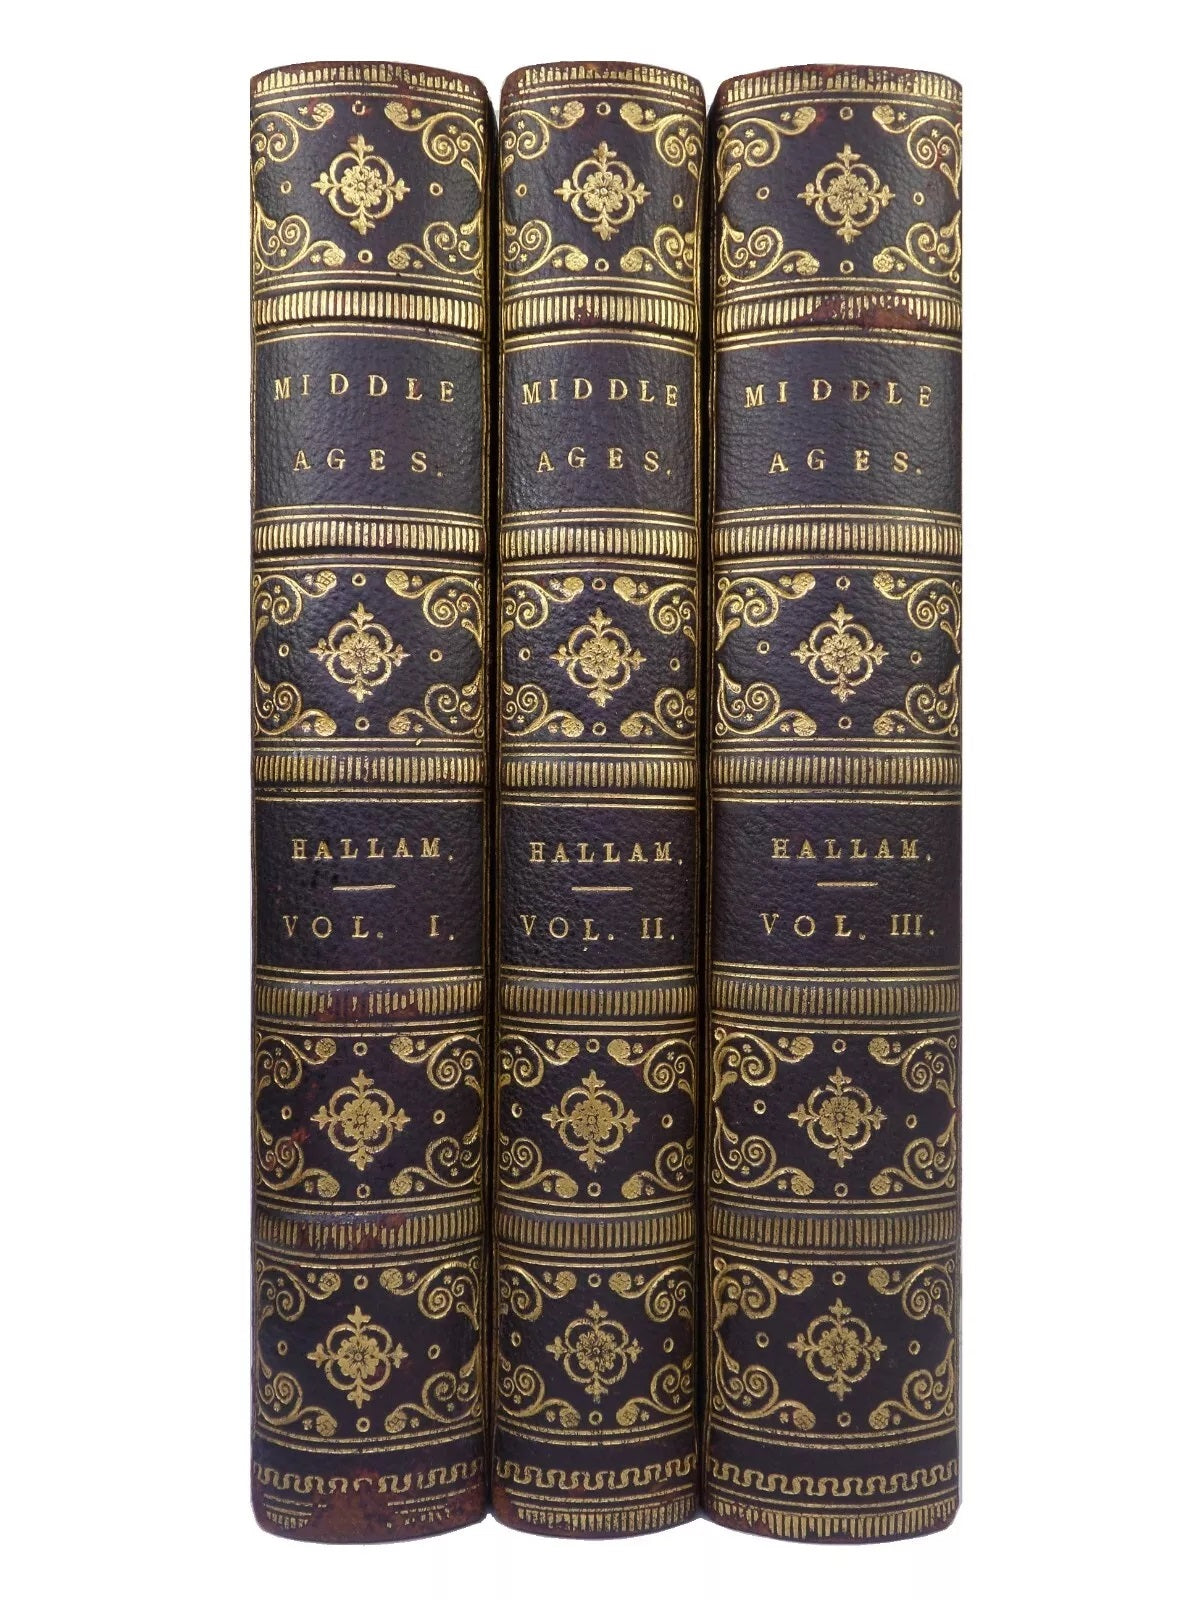 VIEW OF THE STATE OF EUROPE DURING THE MIDDLE AGES BY HENRY HALLAM 1826 LEATHER BOUND